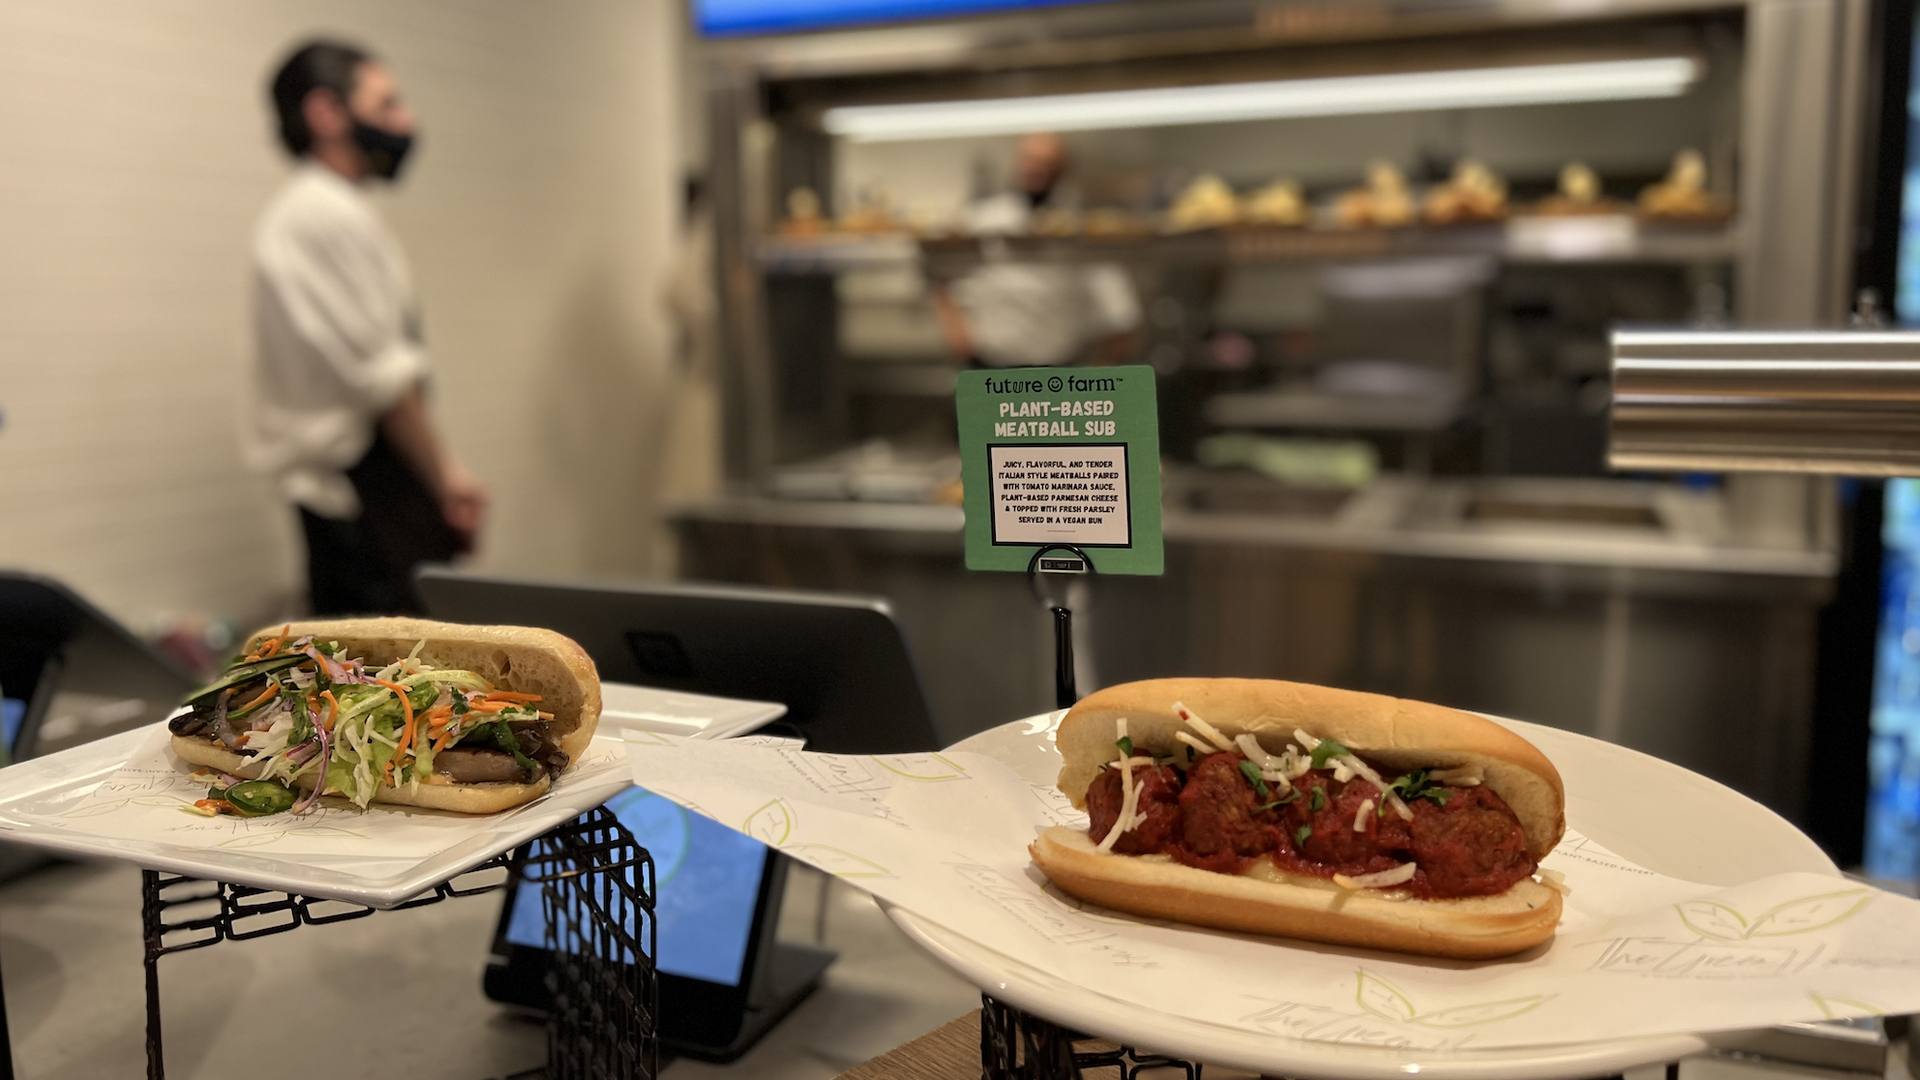 Vegetarian meatball subs and burgers are among the plant-based options at The Green House, a new eatery at San Francisco's Chase Center.